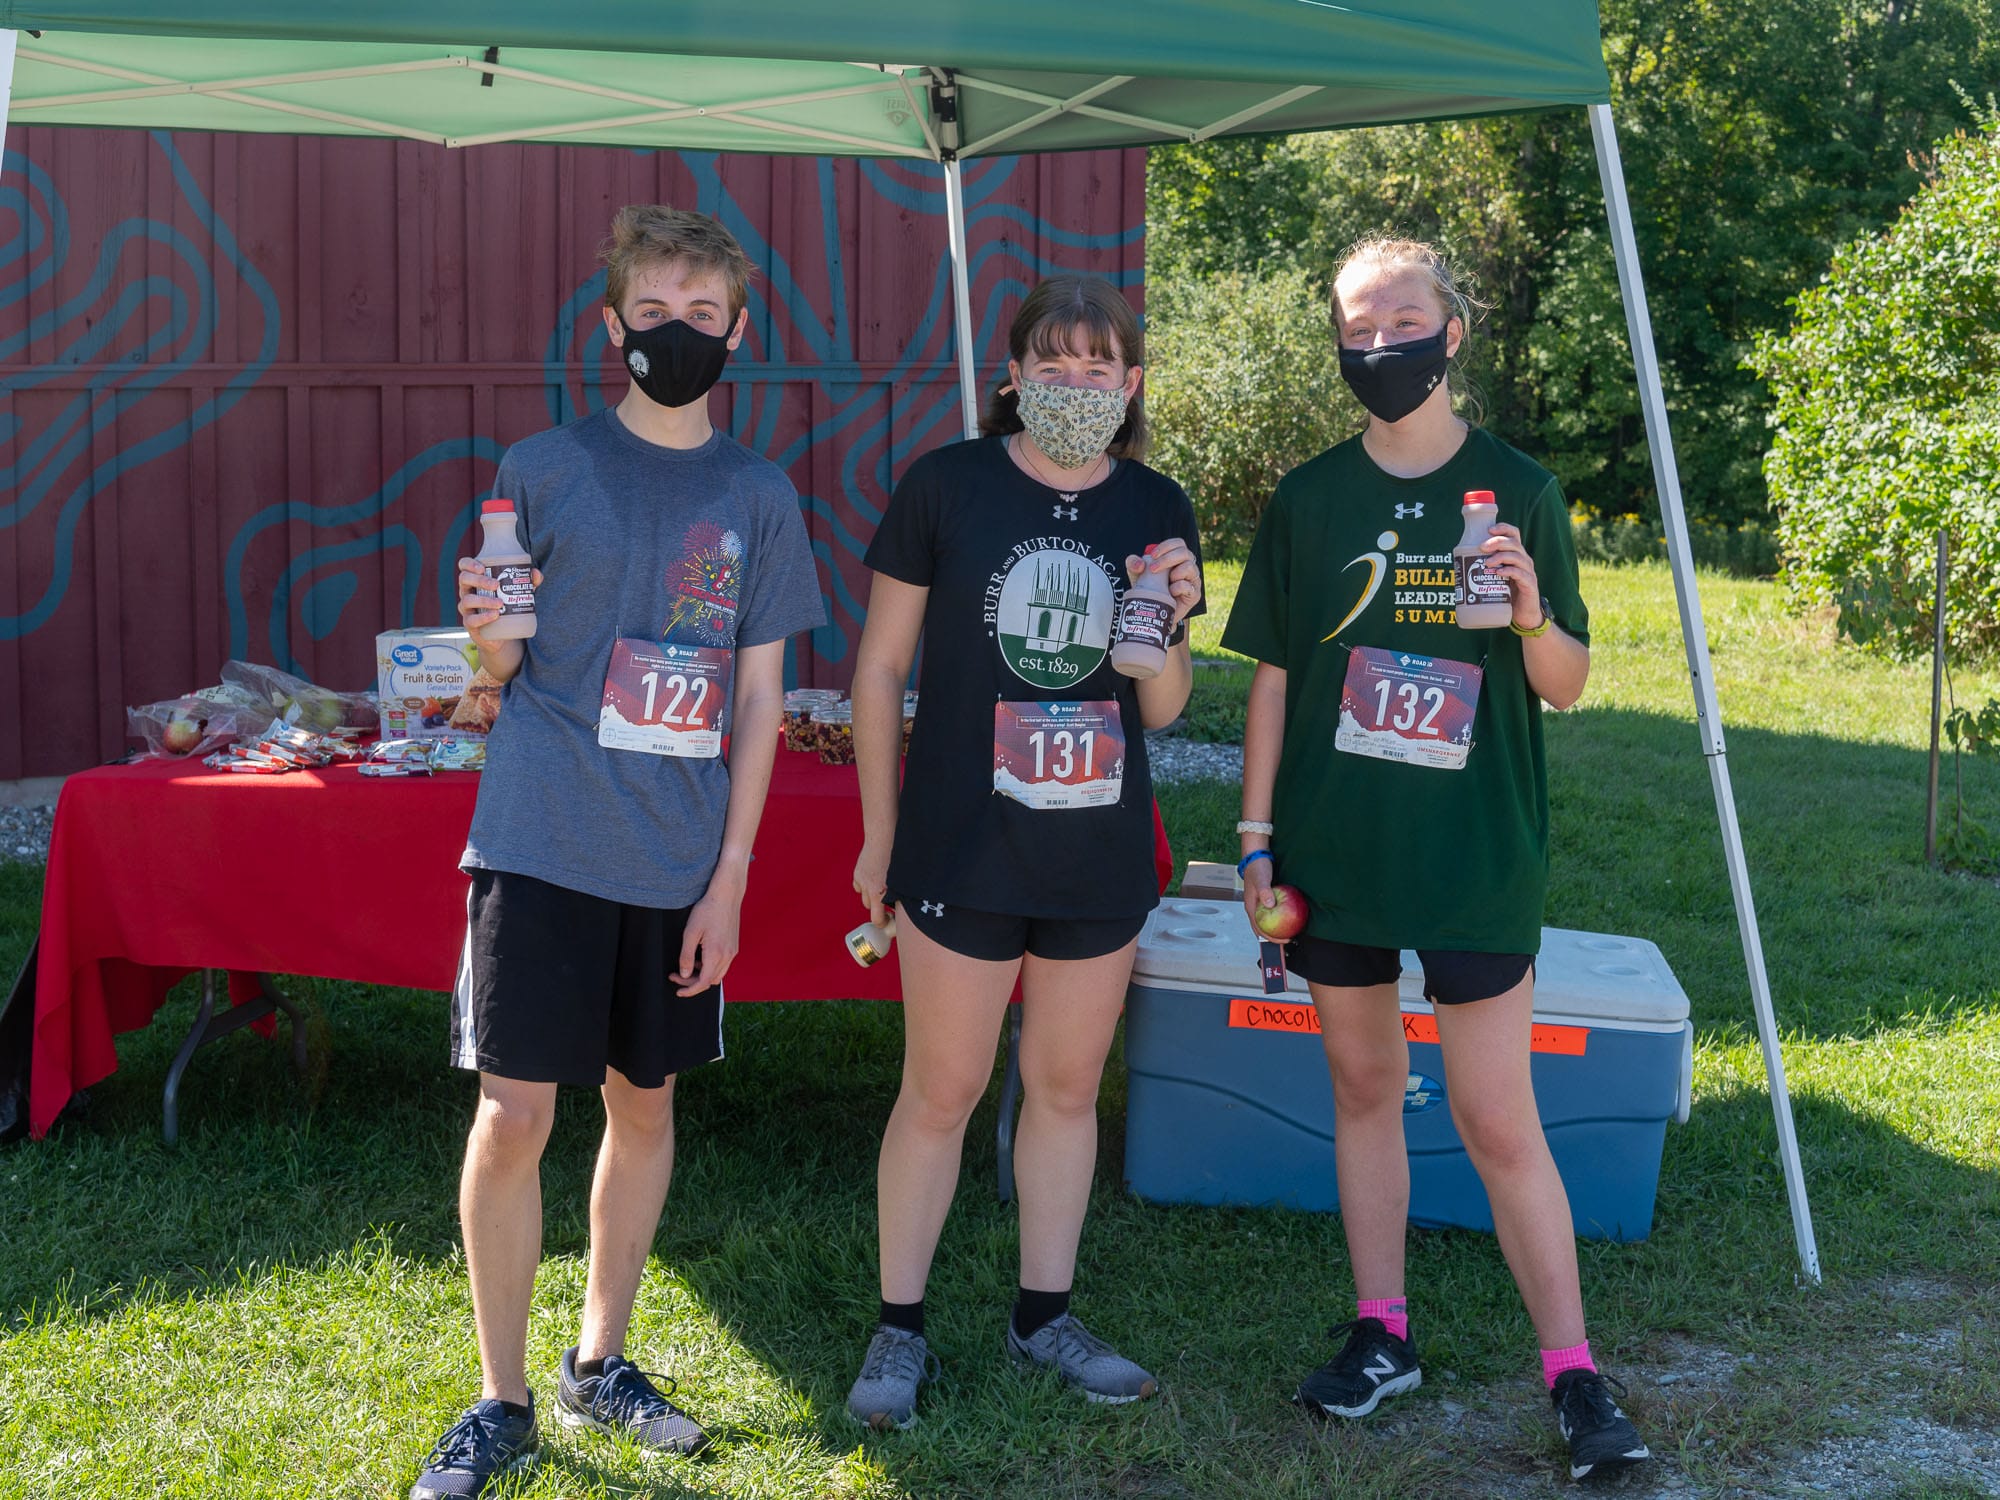 Slate valley trail runners with chocolate milk refreshers